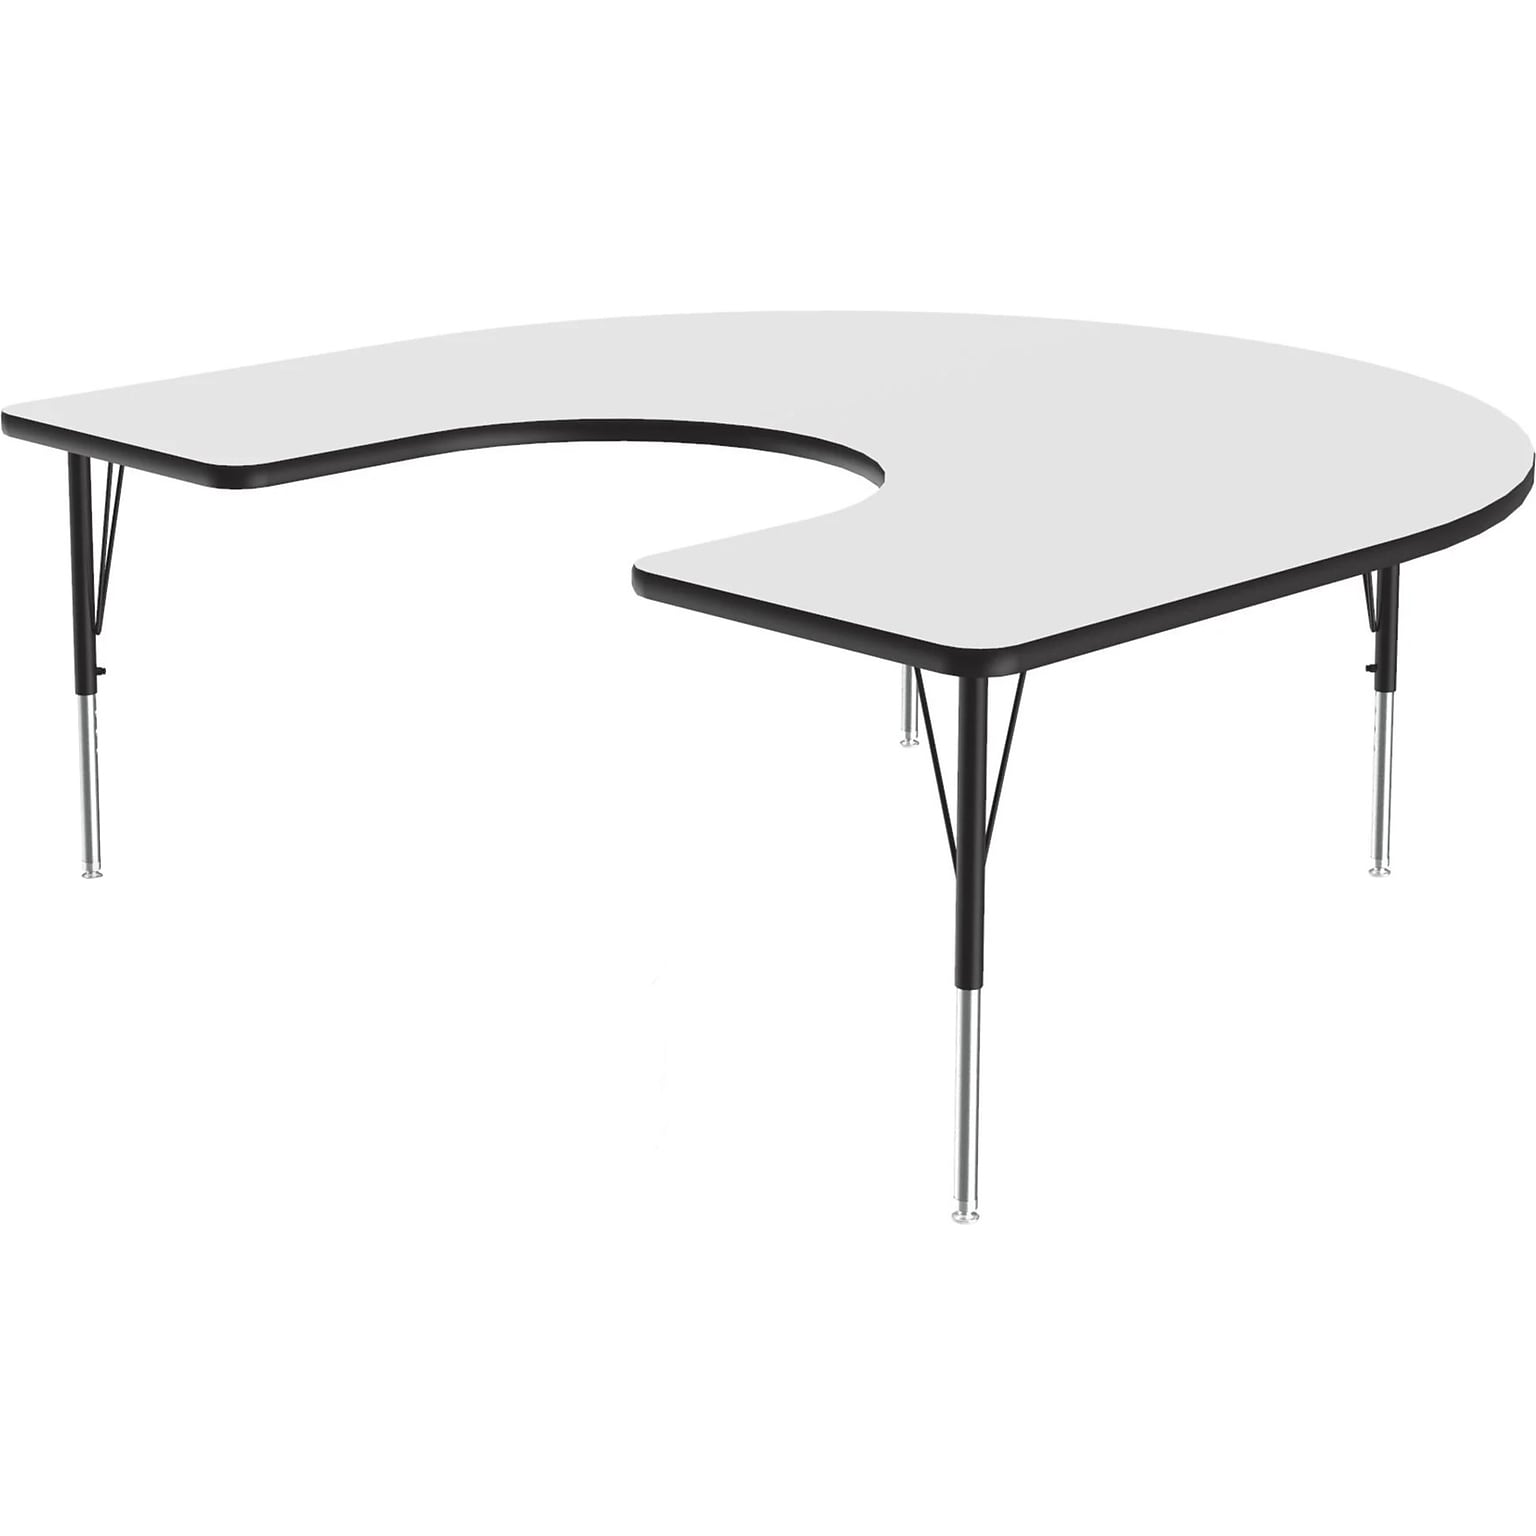 Correll Horseshoe-Shaped Activity Table, 60 x 66, Height-Adjustable, Frosty White/Black (A6066DE-HOR-80)